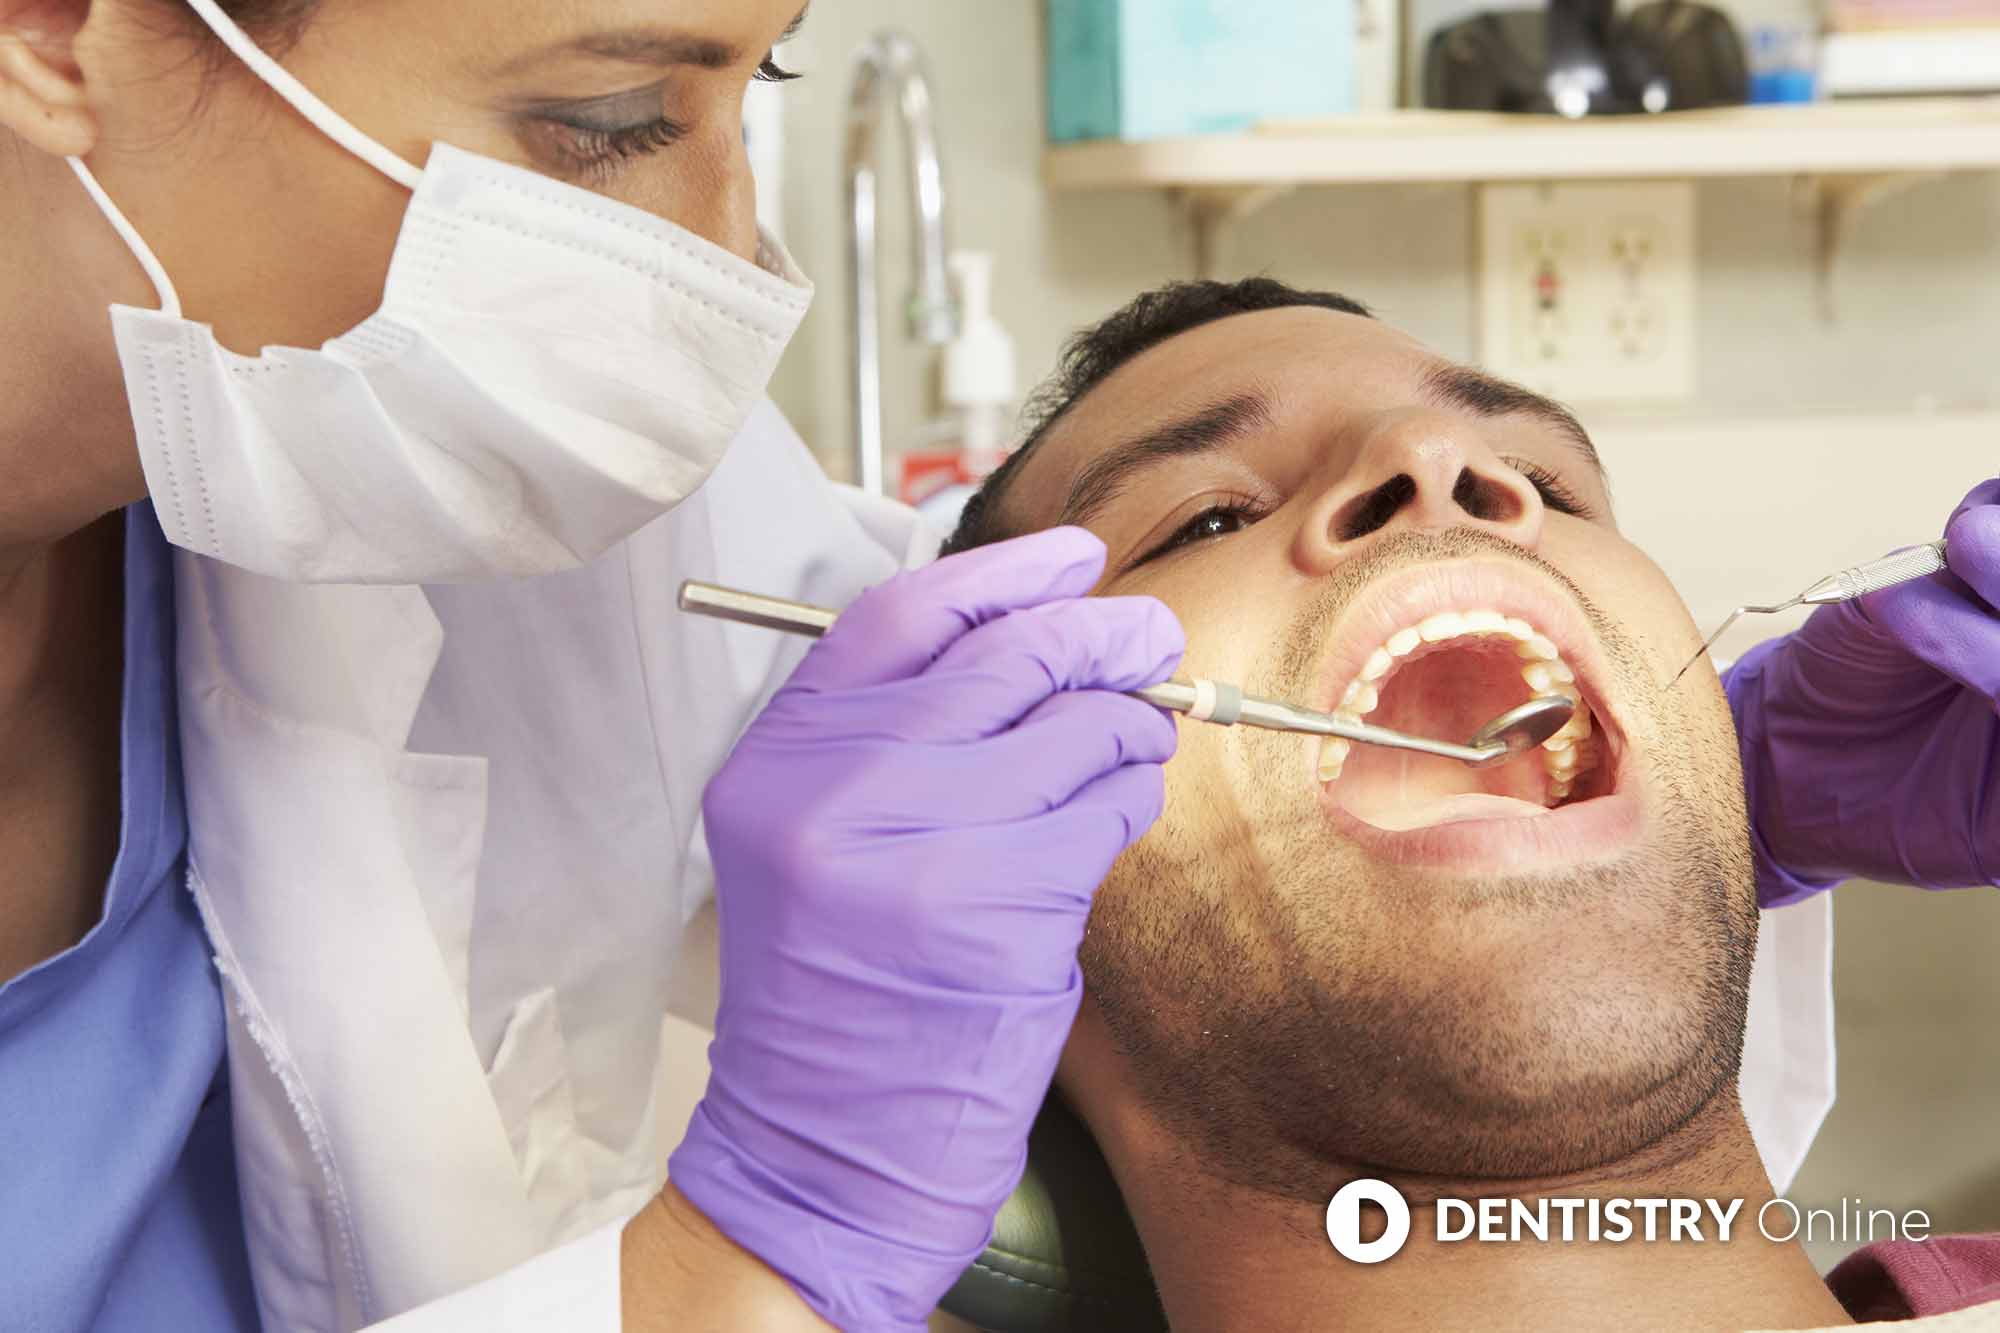 Dental patients from ethnic minority backgrounds have significantly lower levels of satisfaction